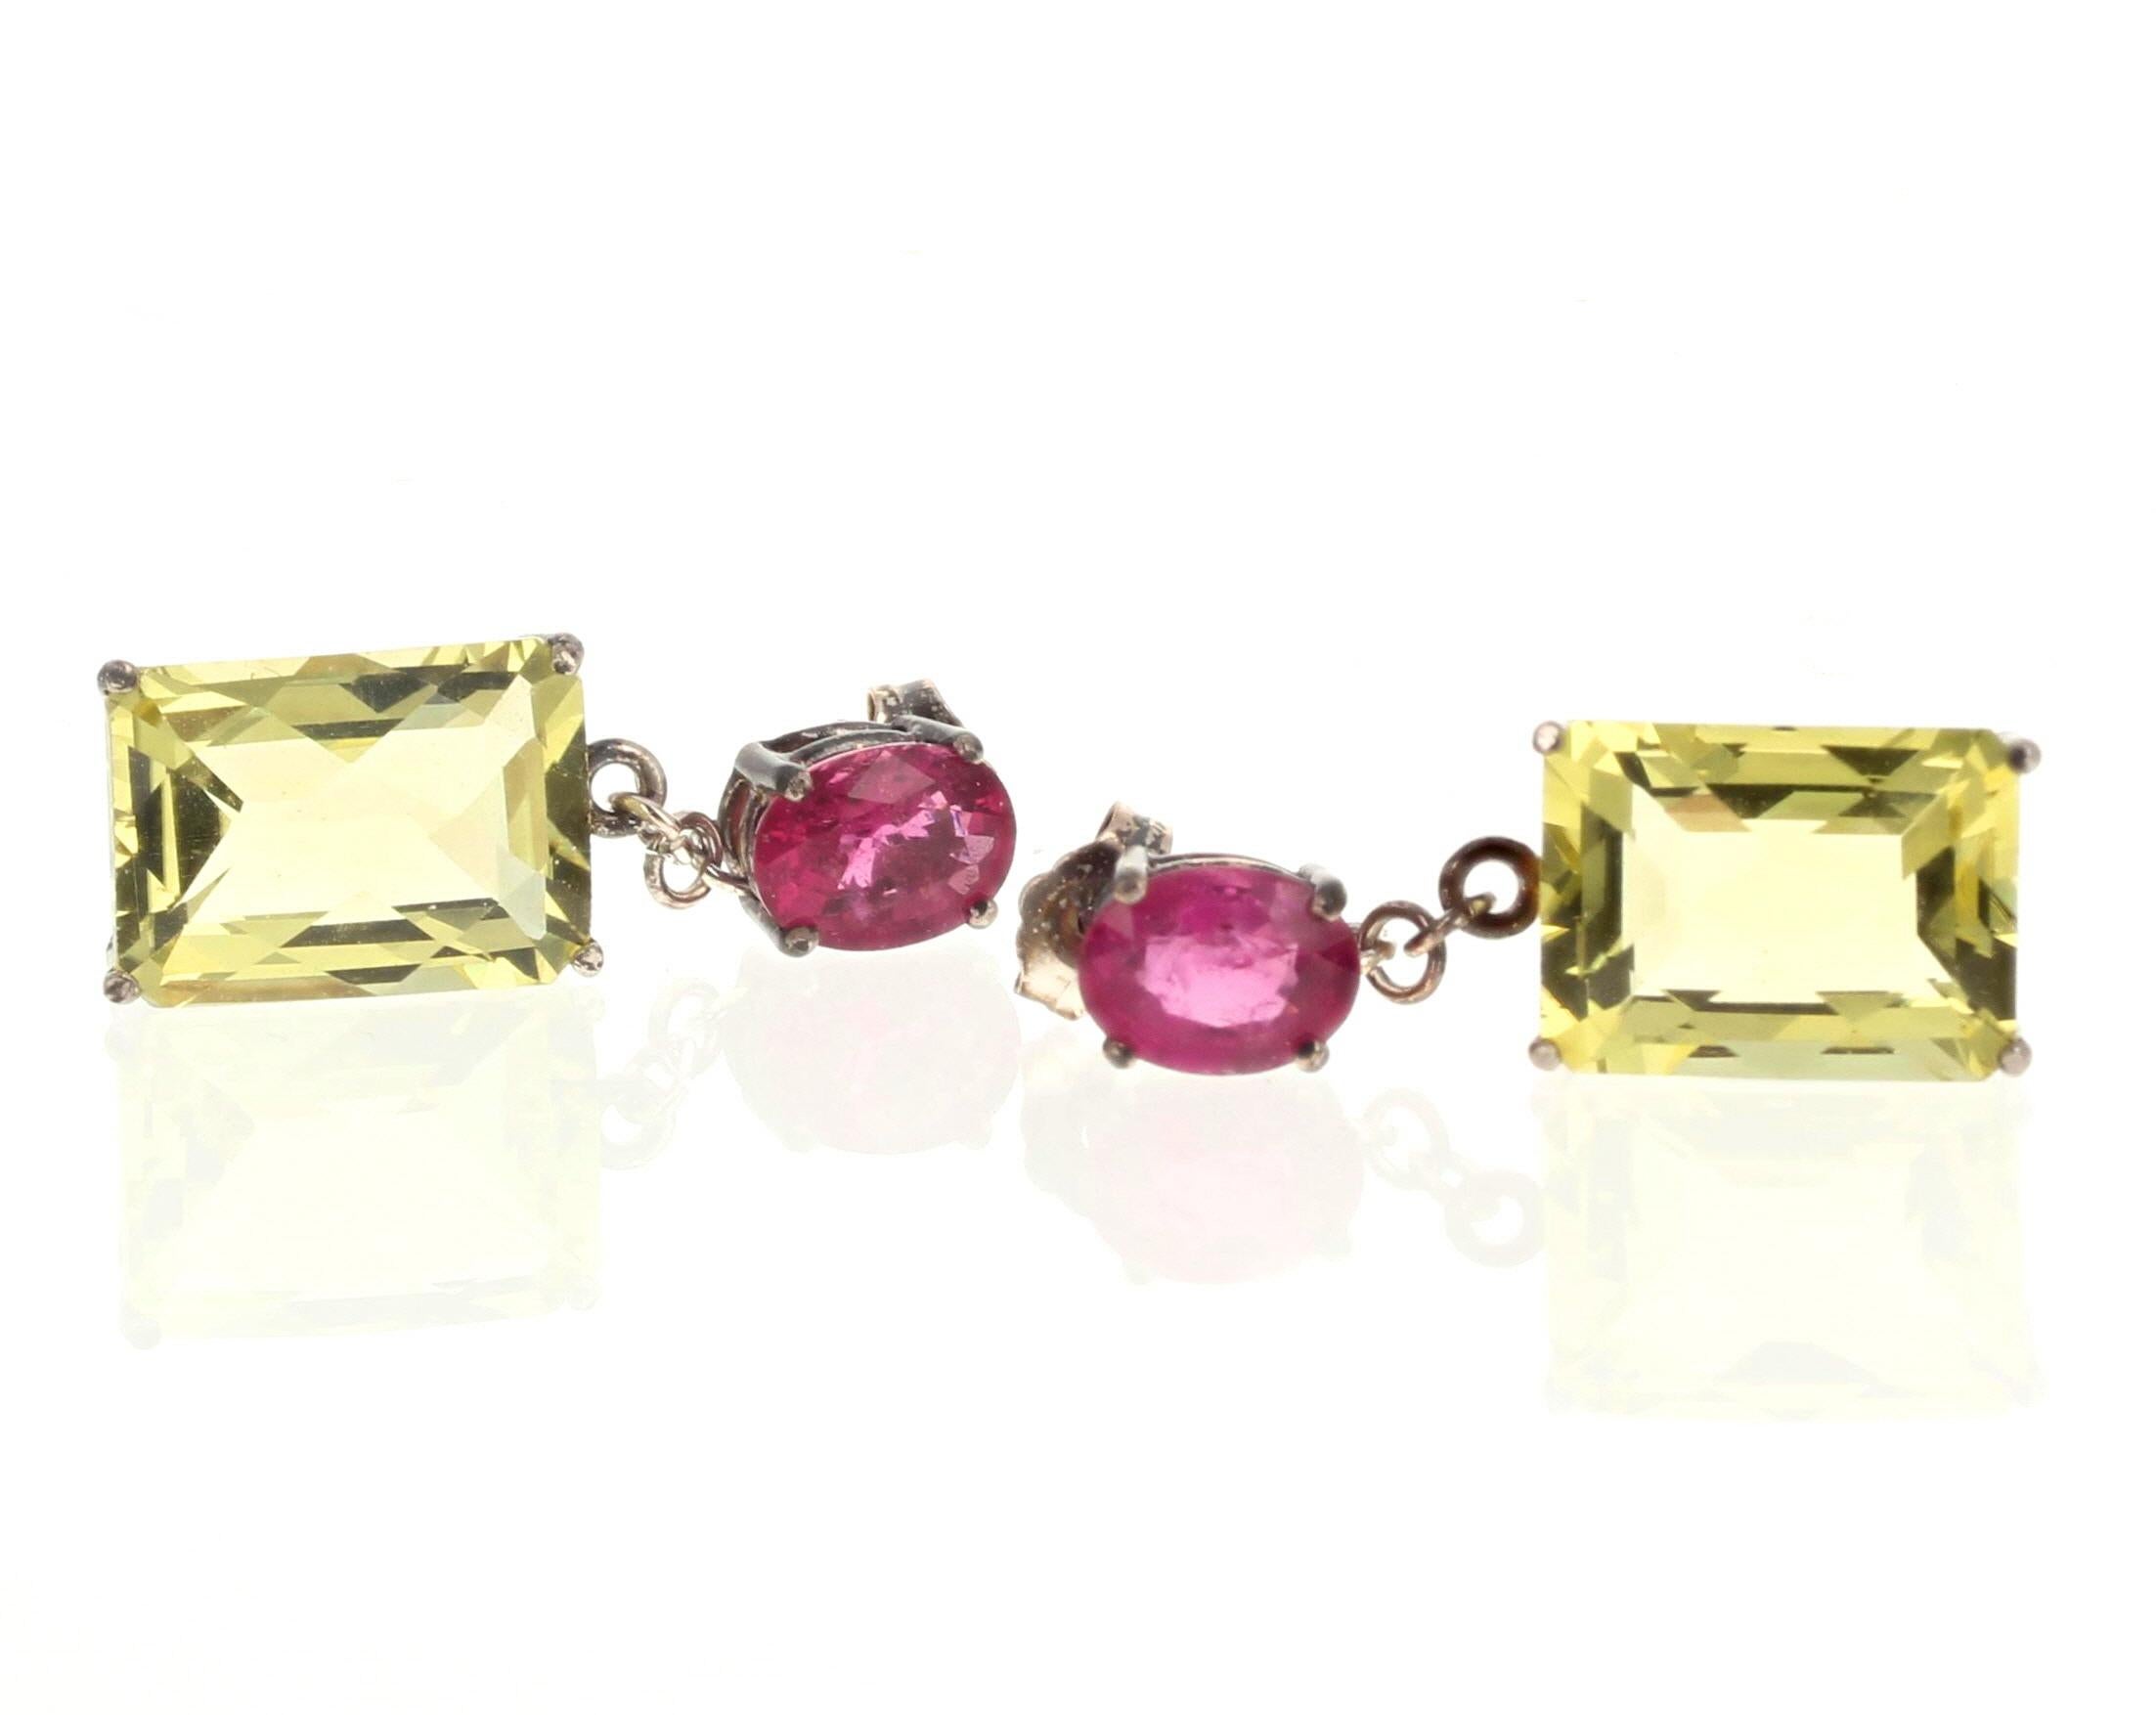 These fun pretty glittering earrings hang approximately 28mm long on their sterling silver studs.  The Tourmalines total approximately 2.5 carats (7 1/2mm x 5mm) and the brilliant yellowy natural Lemon Quartz (14mm x 10mm) total approximately 10